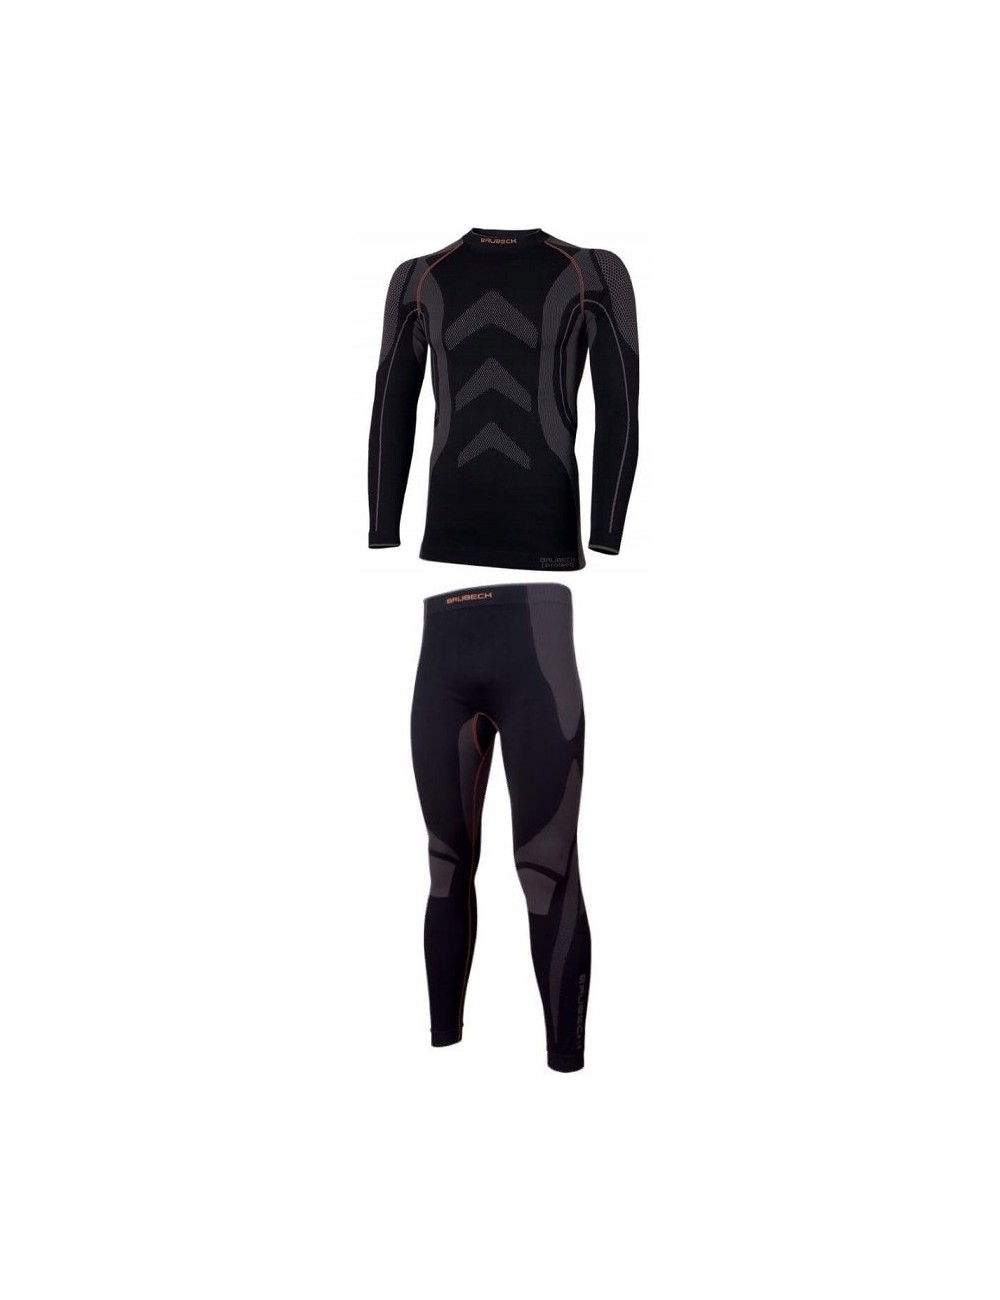 Brubeck Protect thermal clothing set